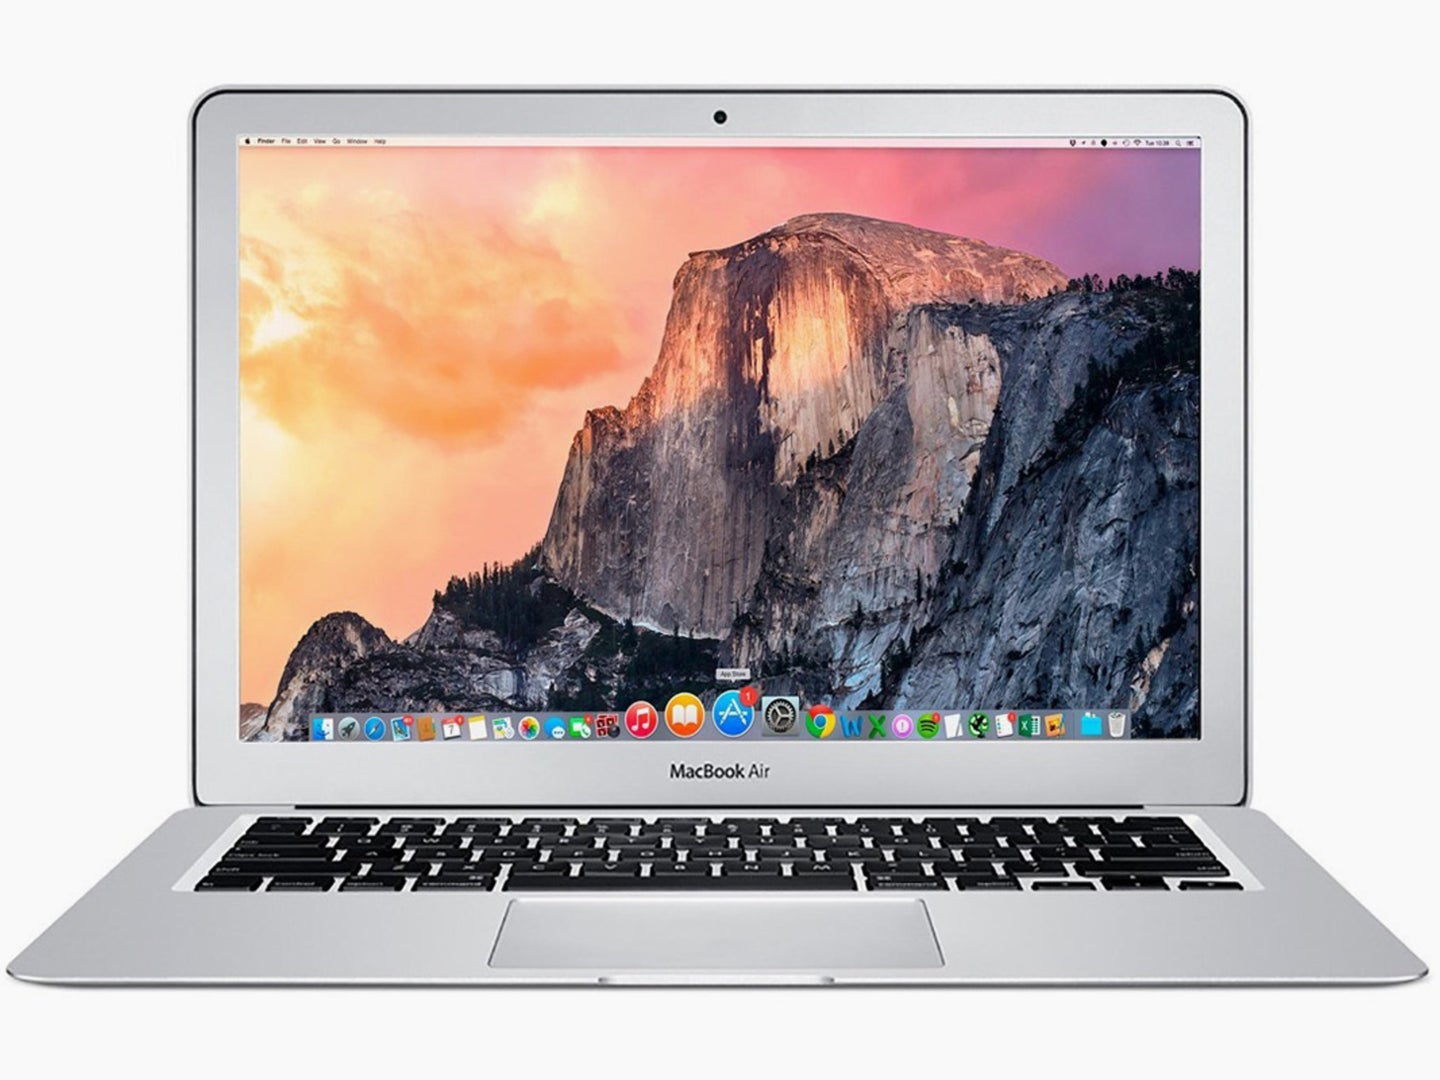 A refurbished 2017 MacBook Air on a white background